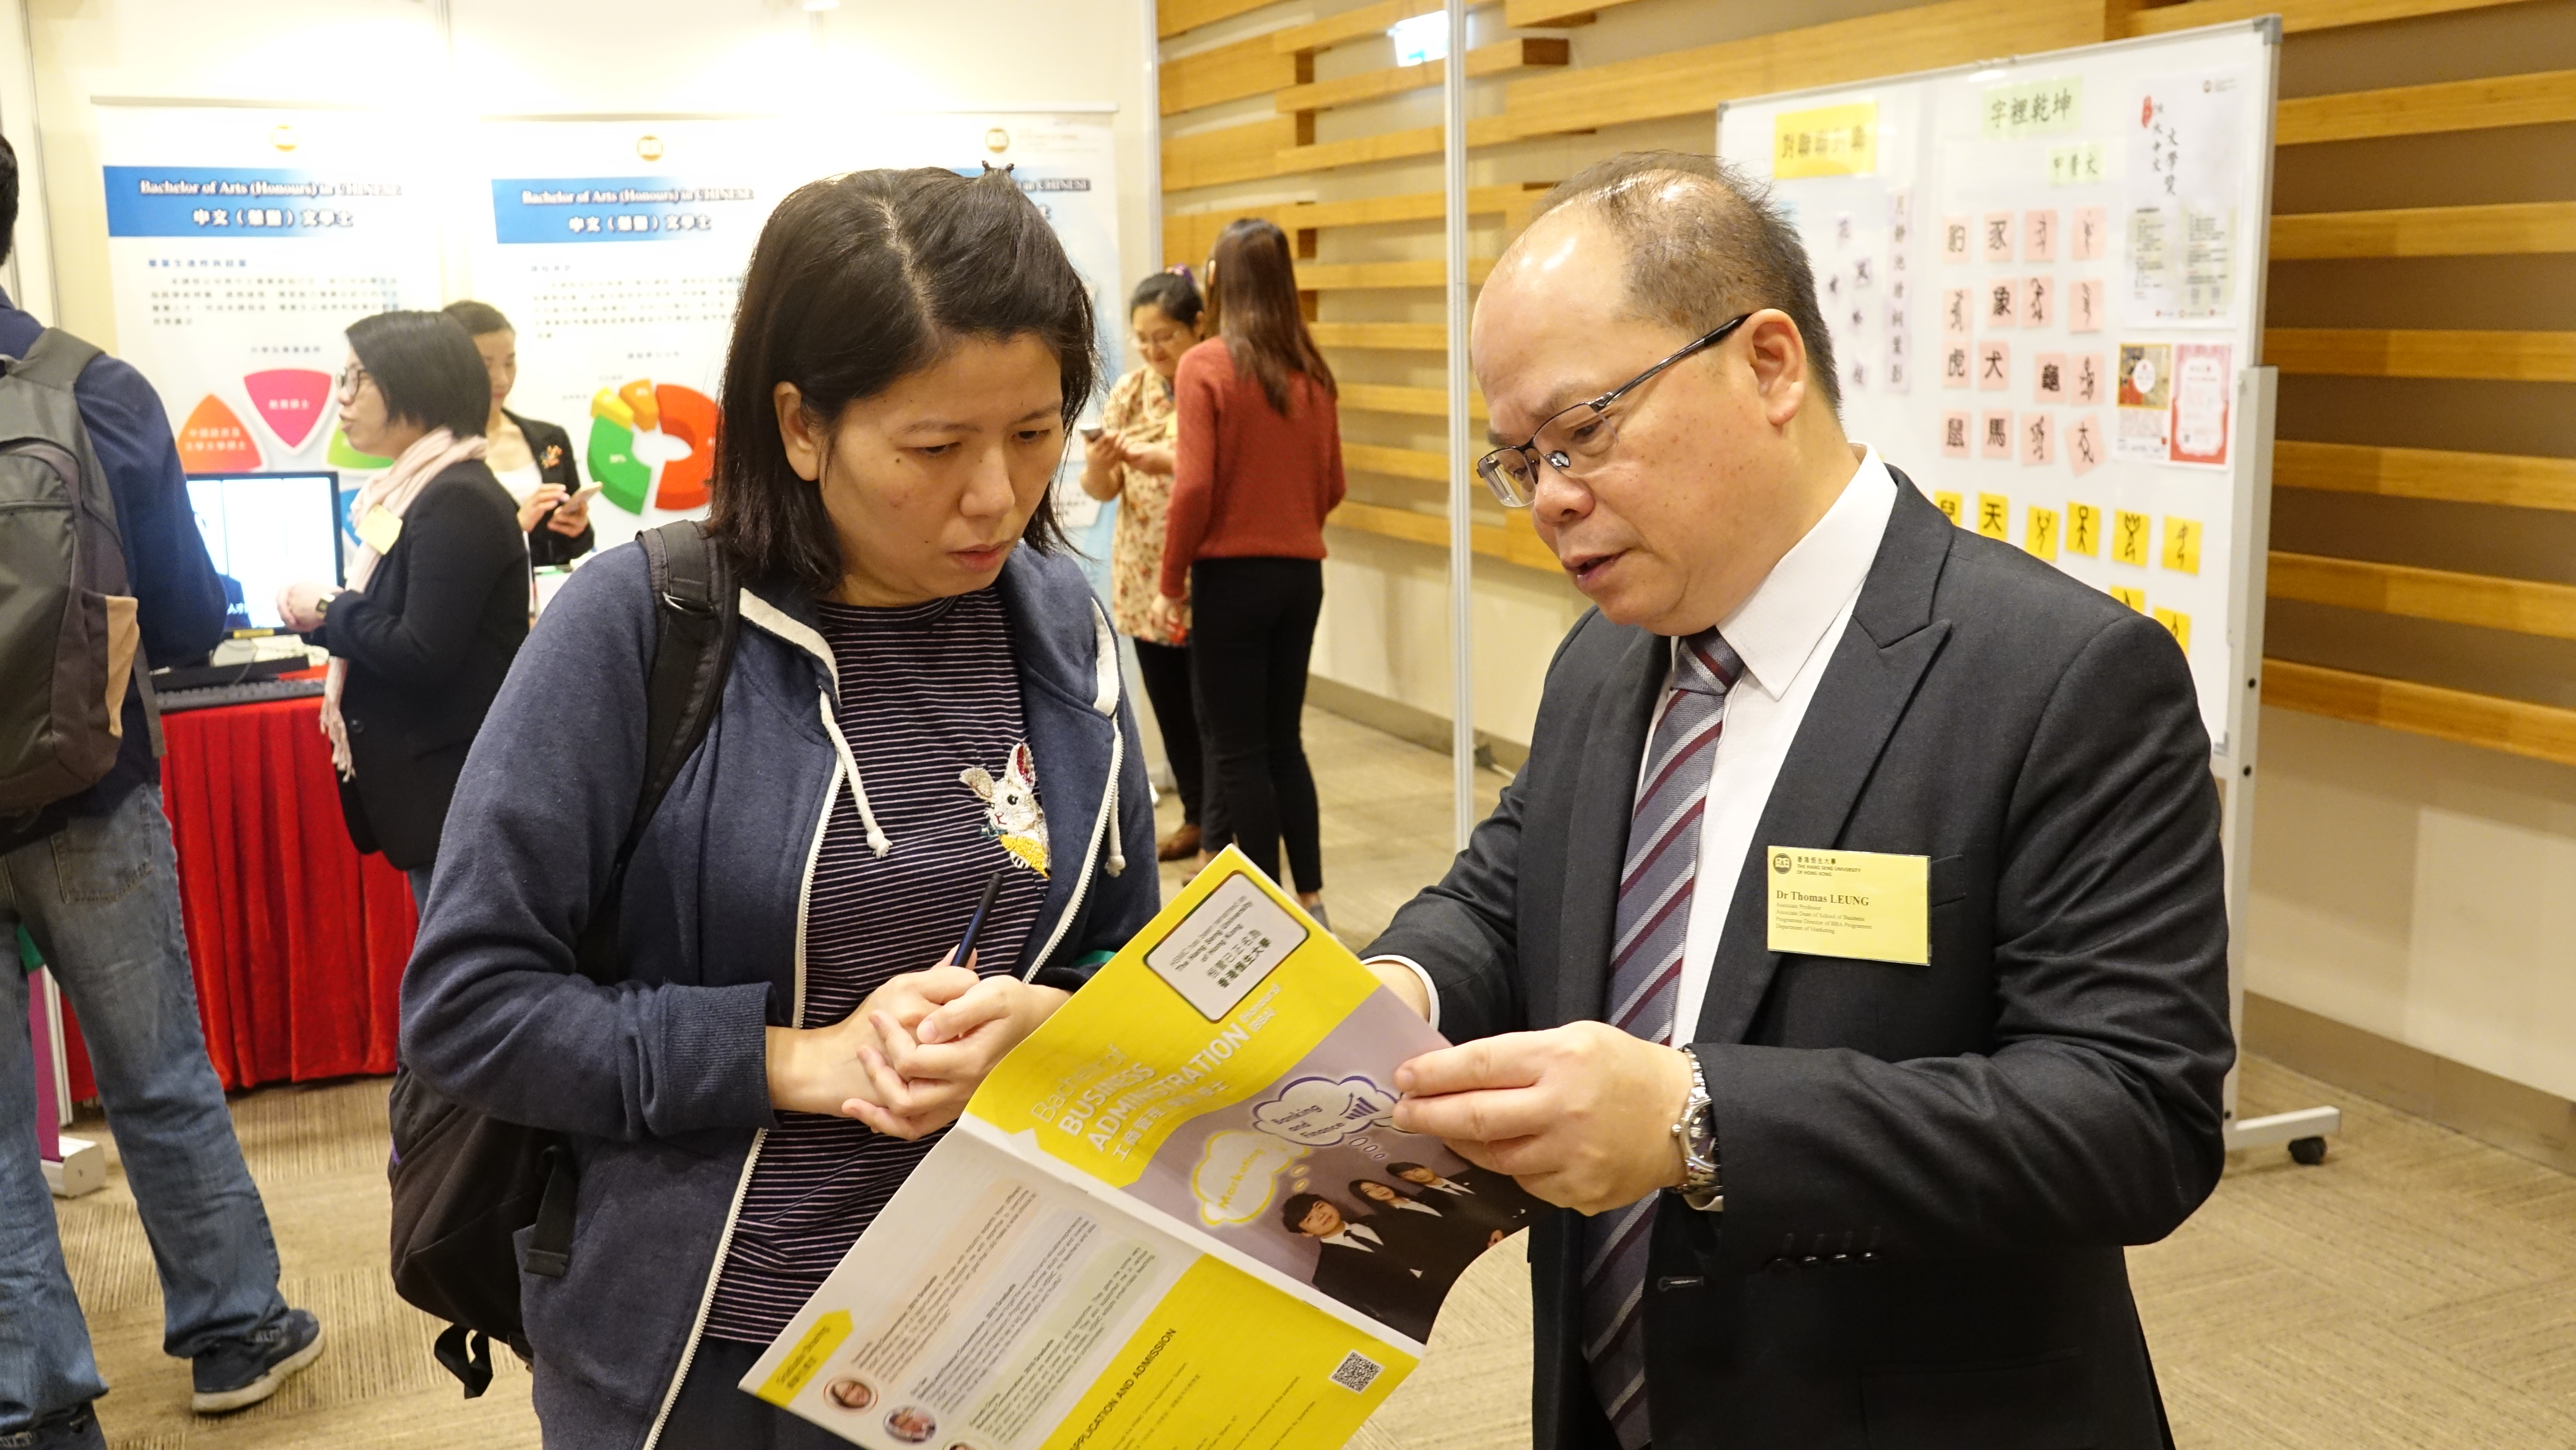 Dr Leung introduced SBUS’s programmes to the mother of a secondary school student.